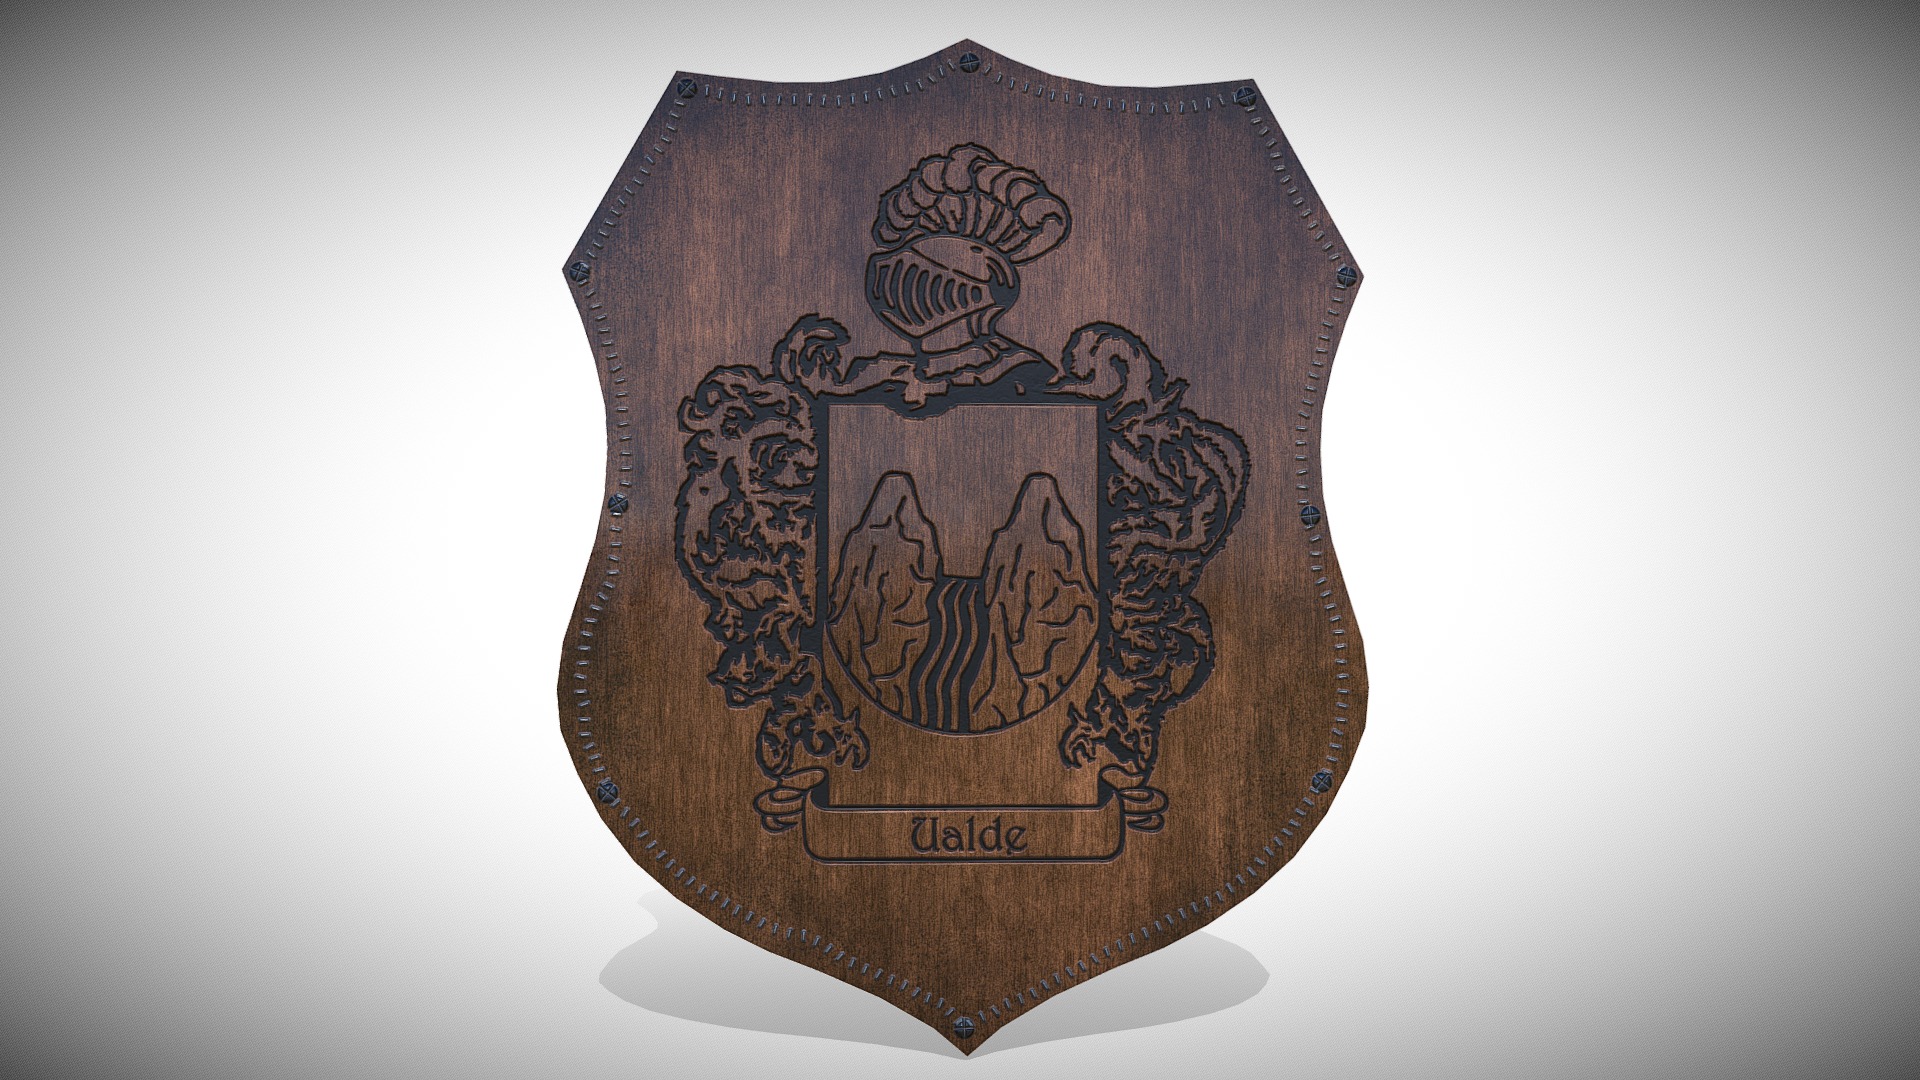 3D model Heraldica Ualde - This is a 3D model of the Heraldica Ualde. The 3D model is about a wood box with a design on it.